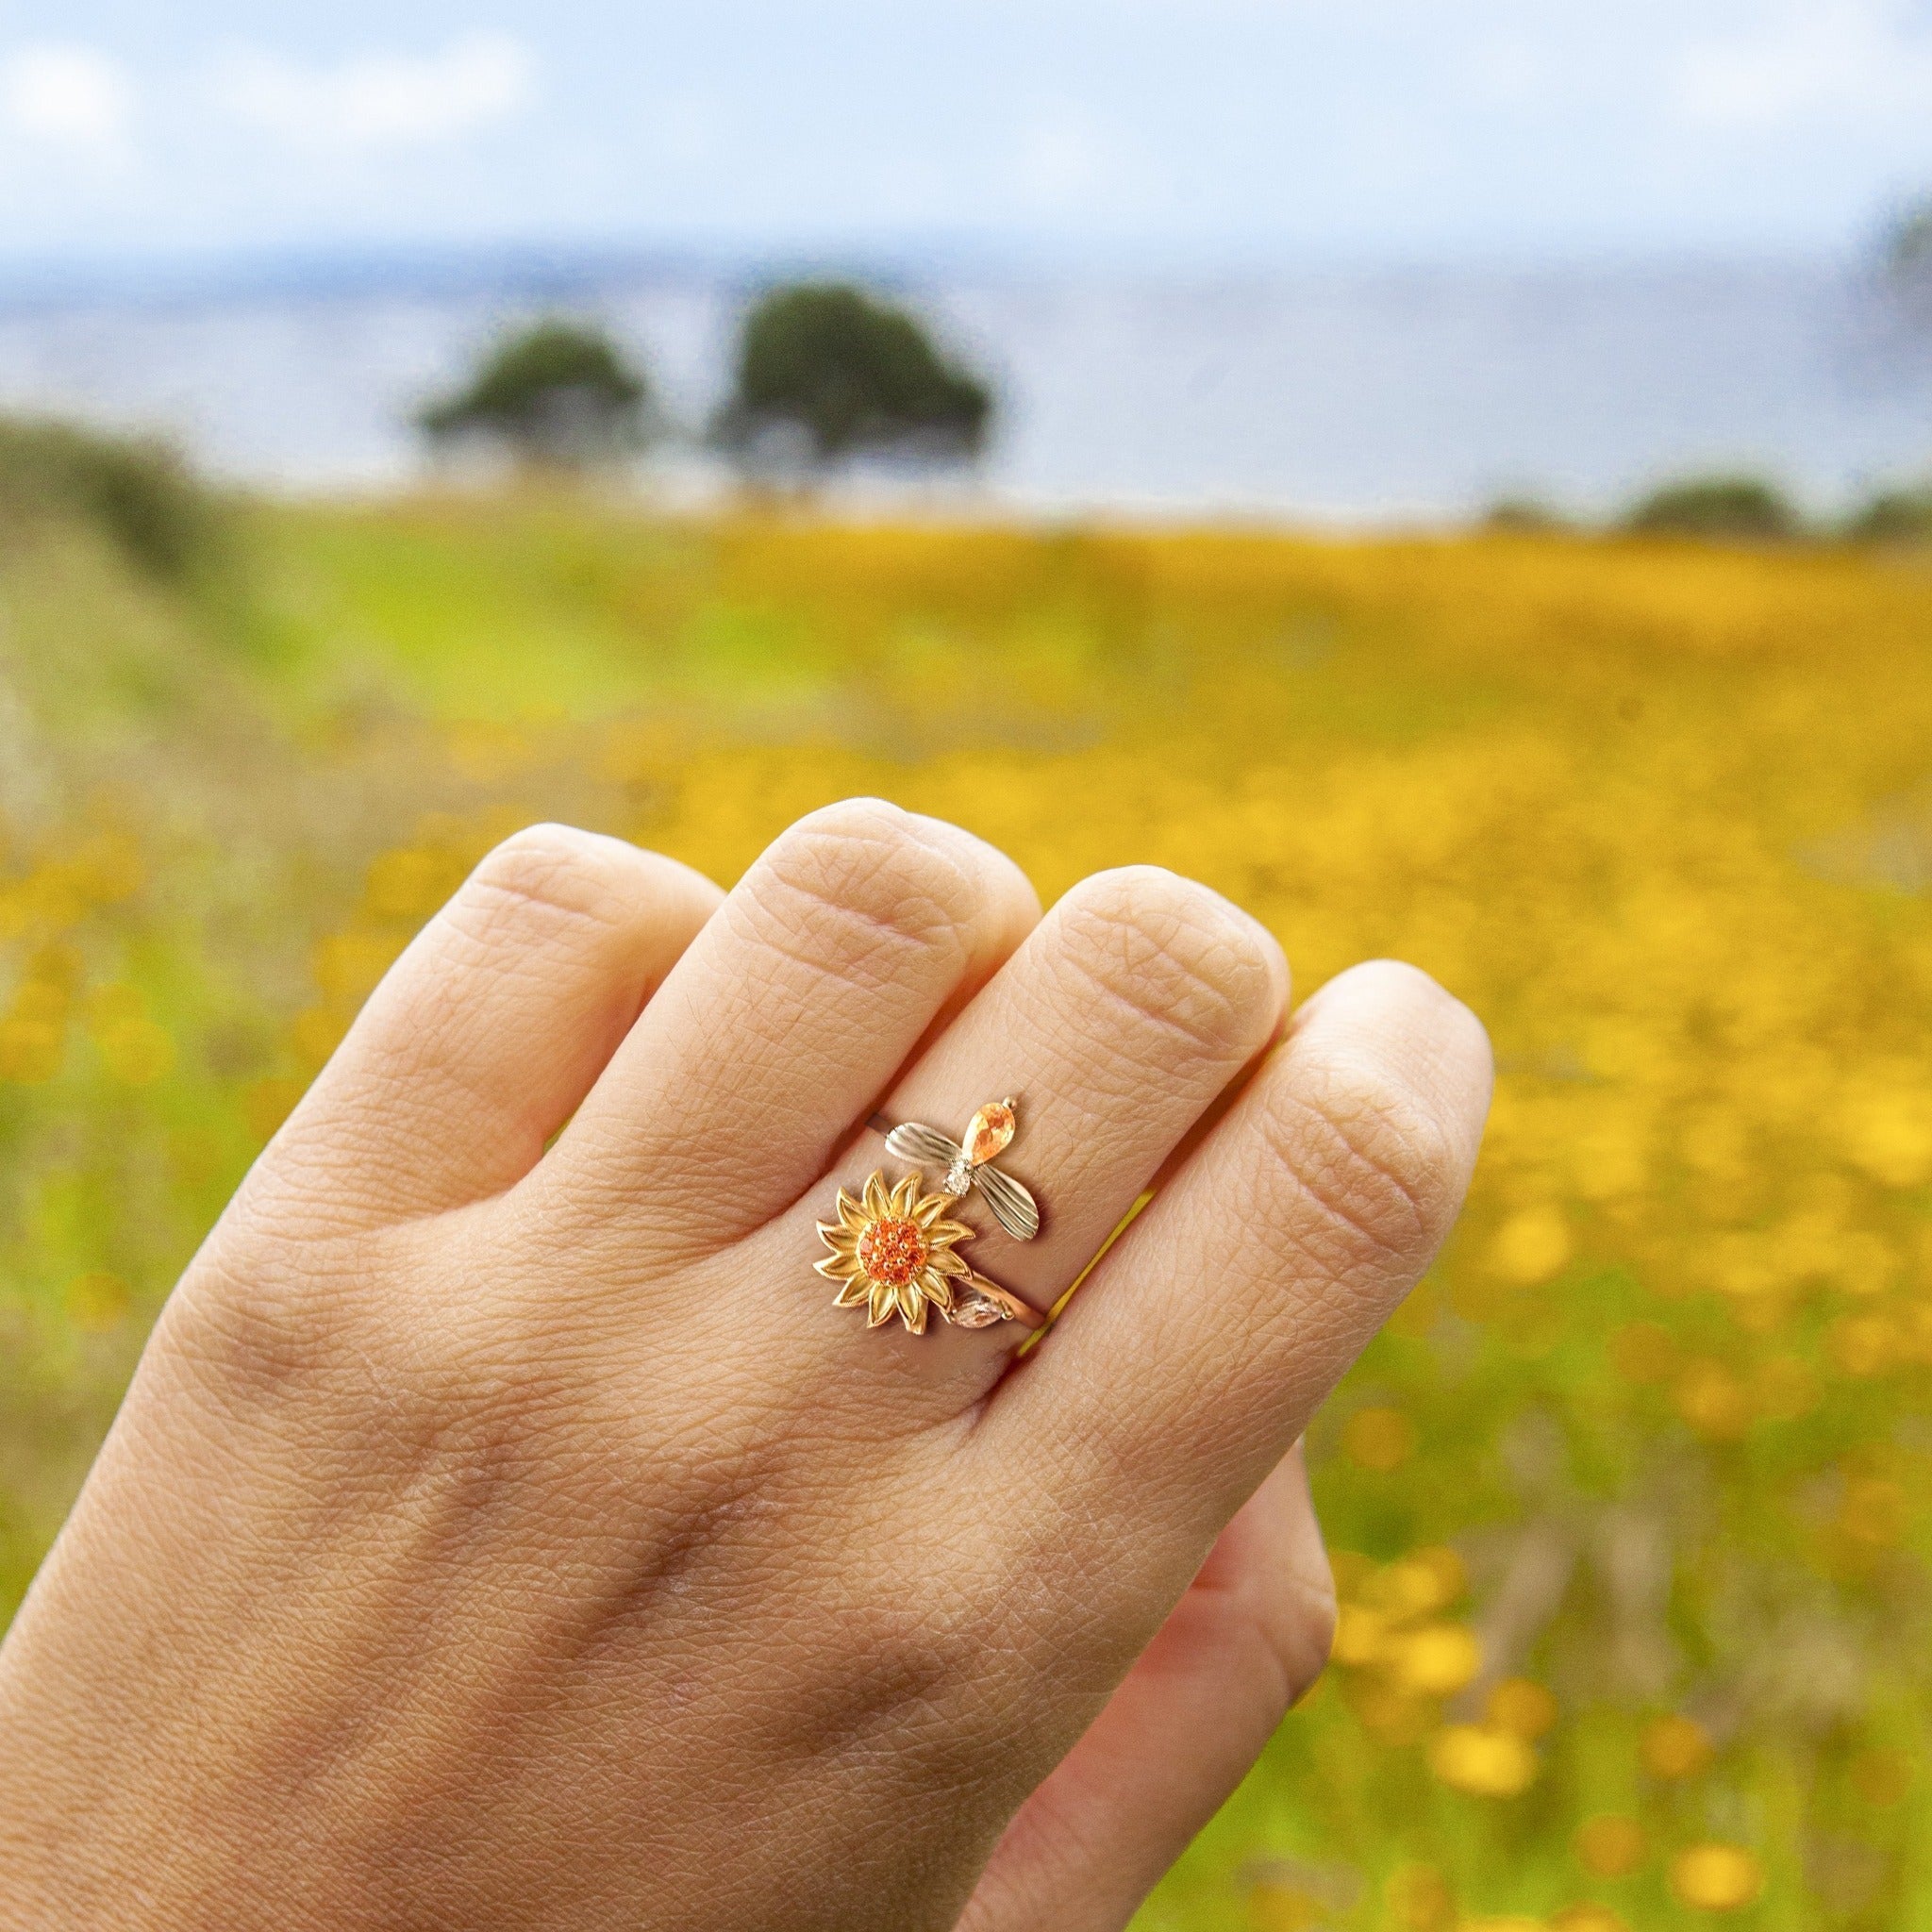 To My Daughter Sunflower Anxiety Ring